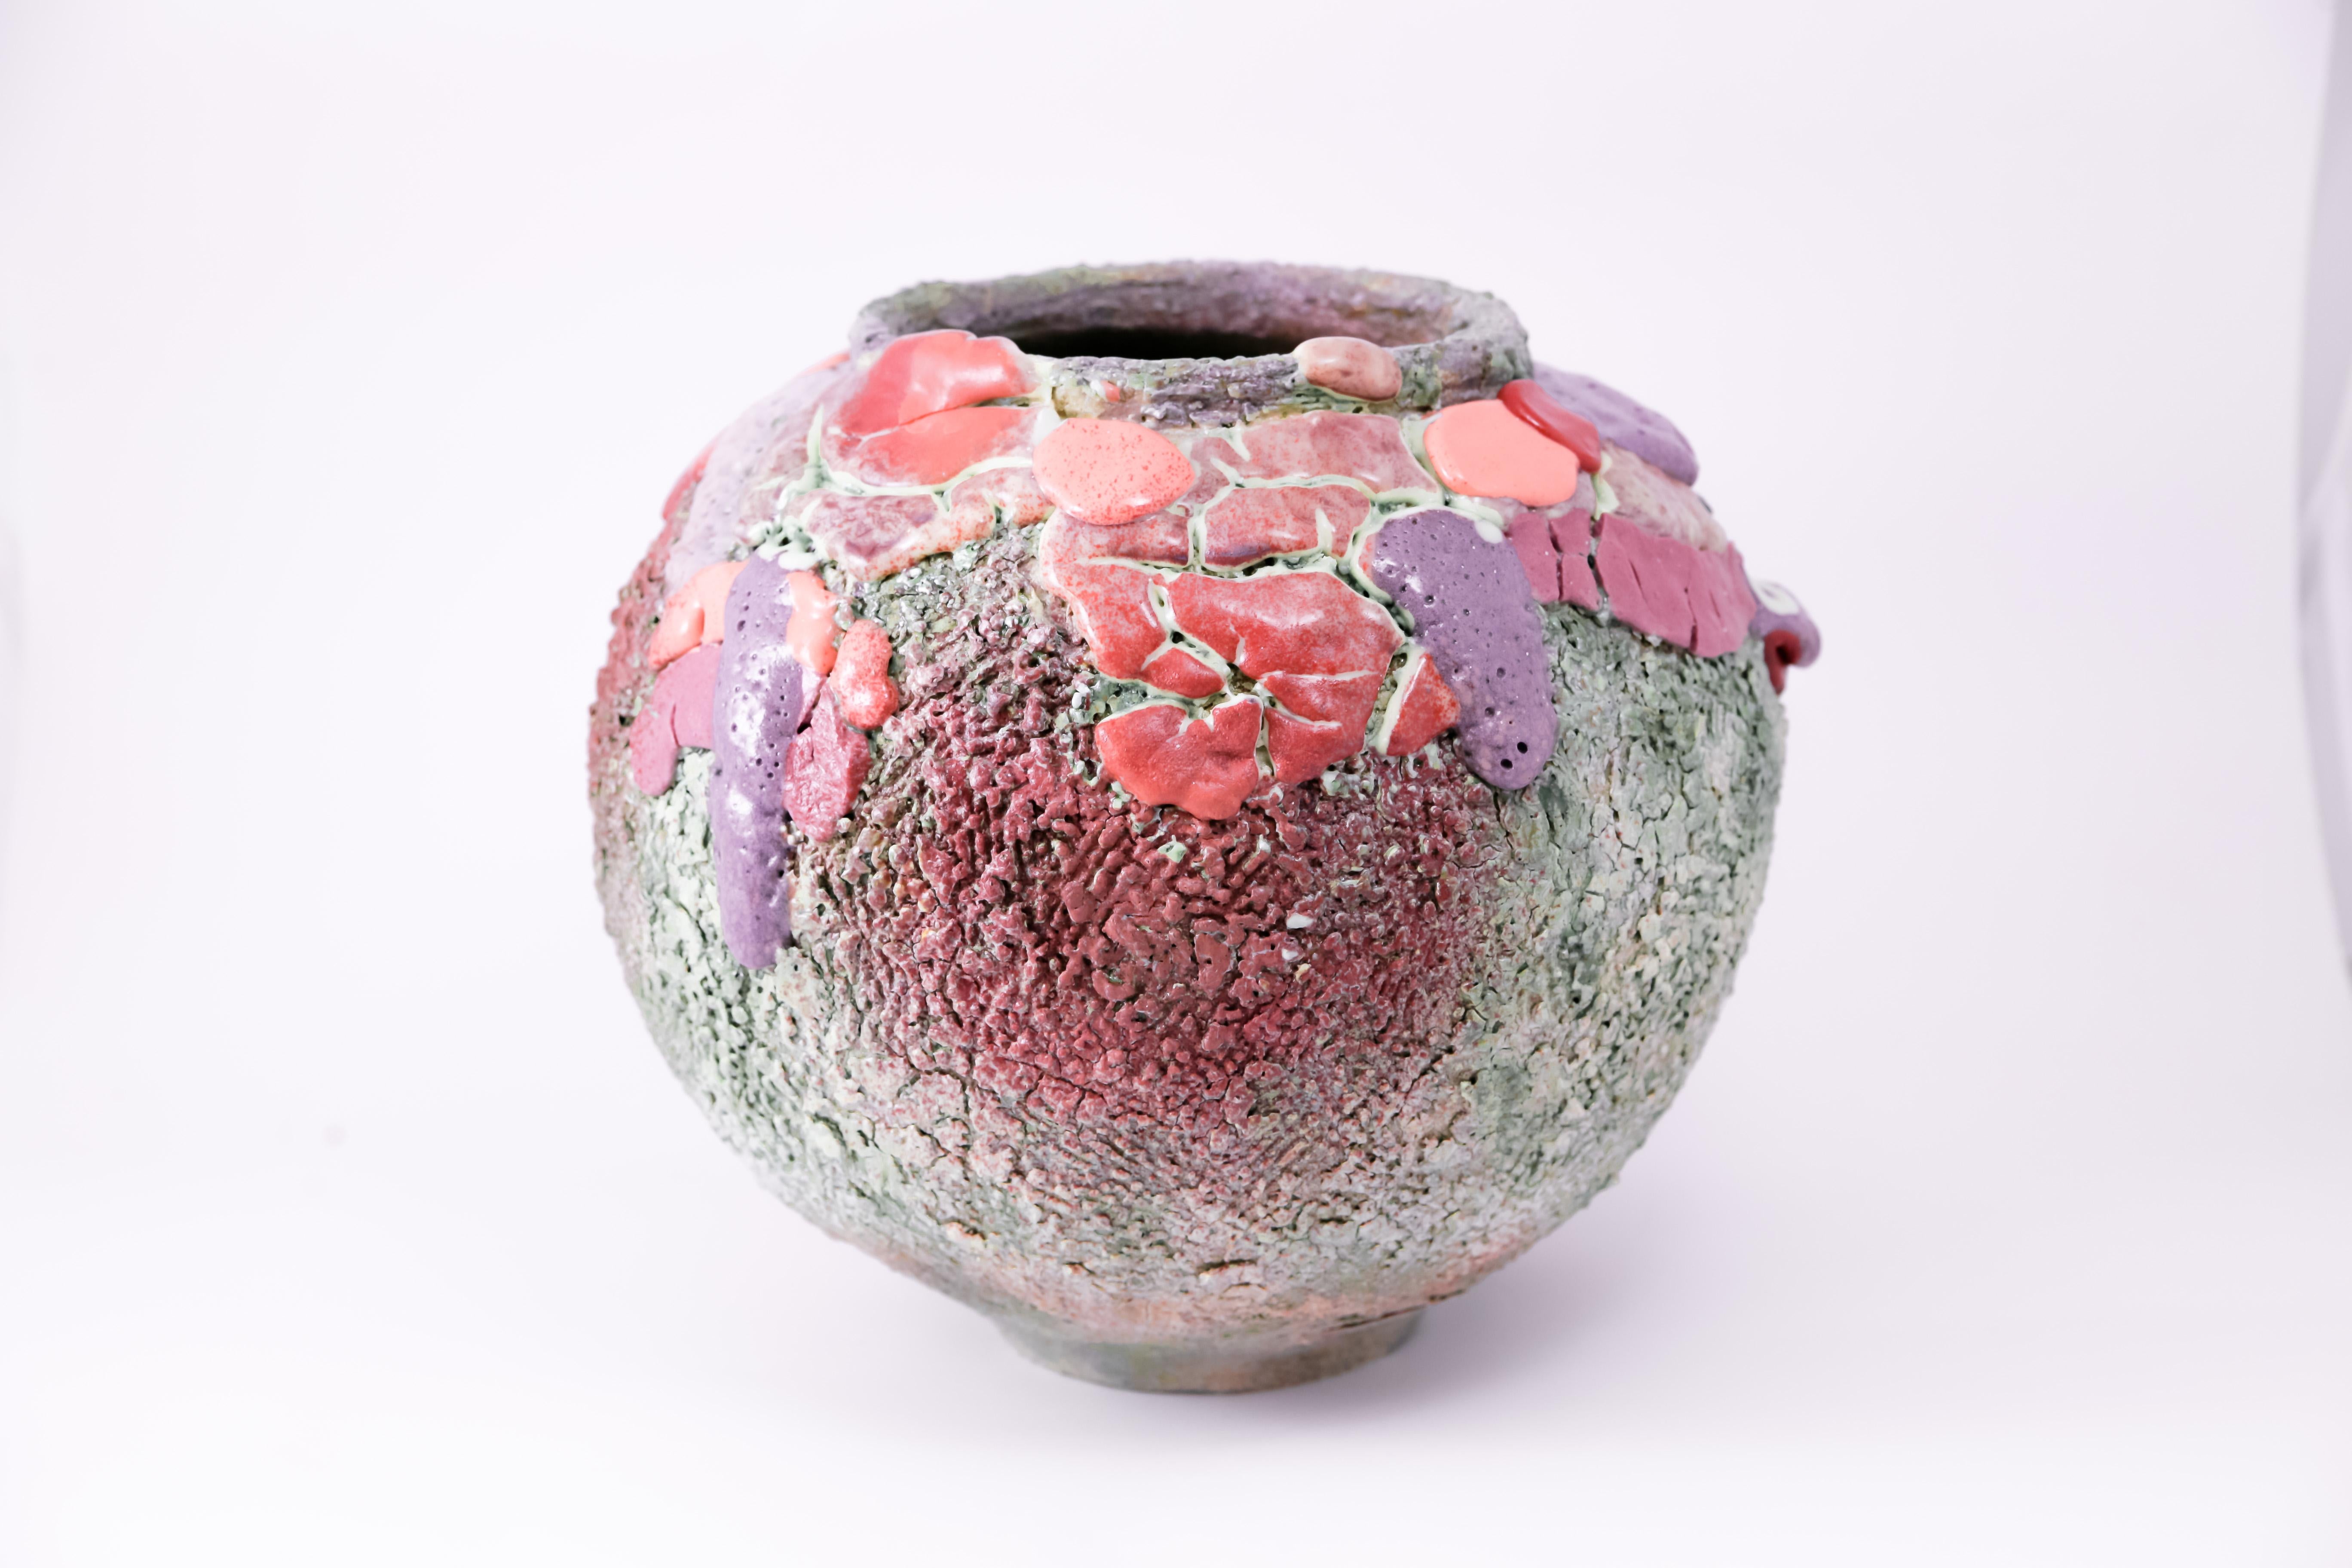 Lipstick moon vase by Arina Antonova
Dimensions: H 27 x D 30 cm
Materials: Stoneware, porcelain, glaze

Born in Sewastopol (Crimea), I was surrounded by the natural variety of the coastal Black Sea views with rocky beaches and picturesque